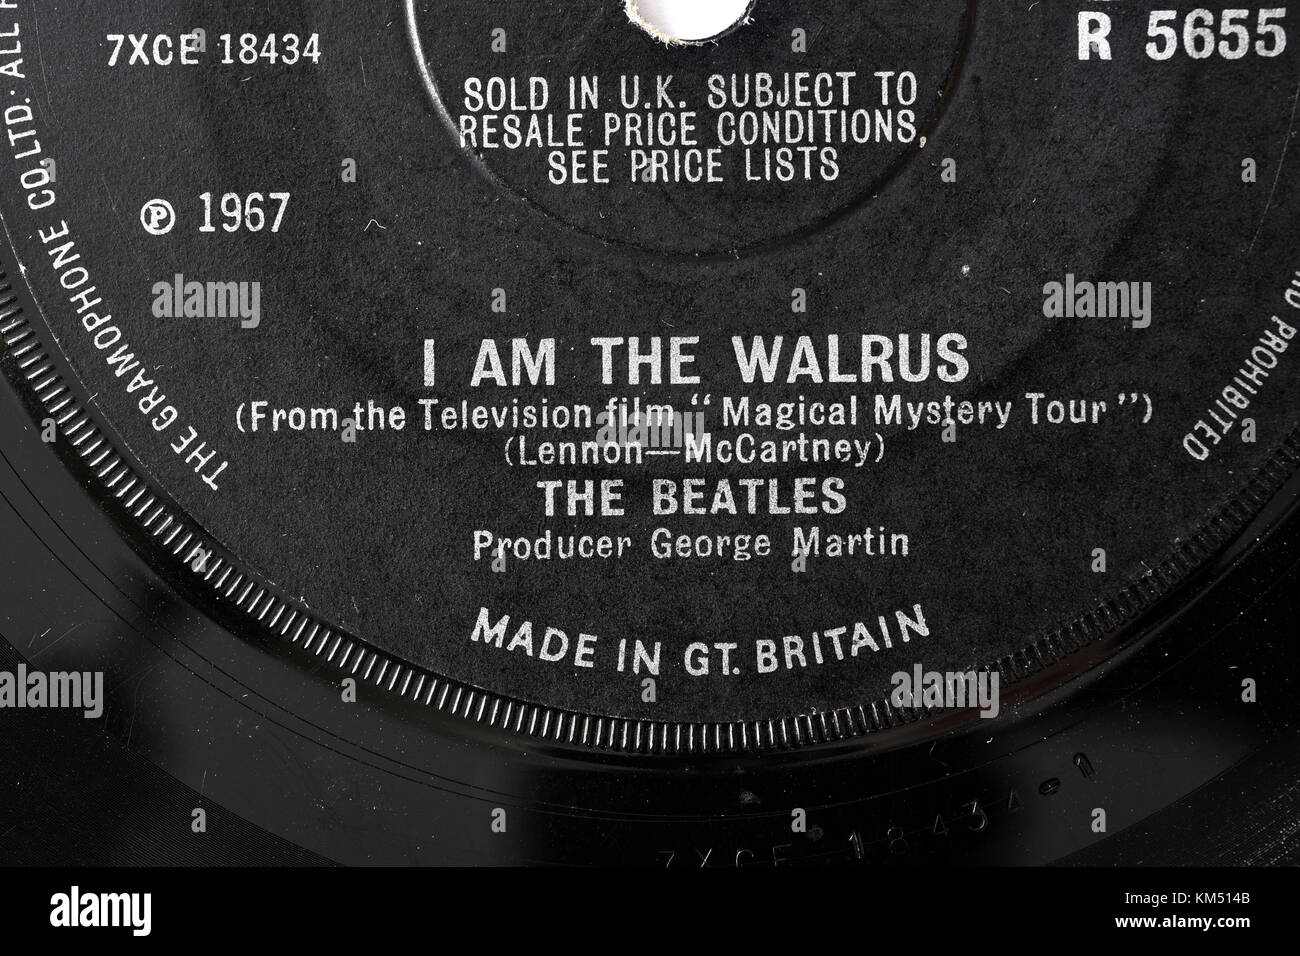 Beatles I Am the Walrus seven inch single label details Stock Photo